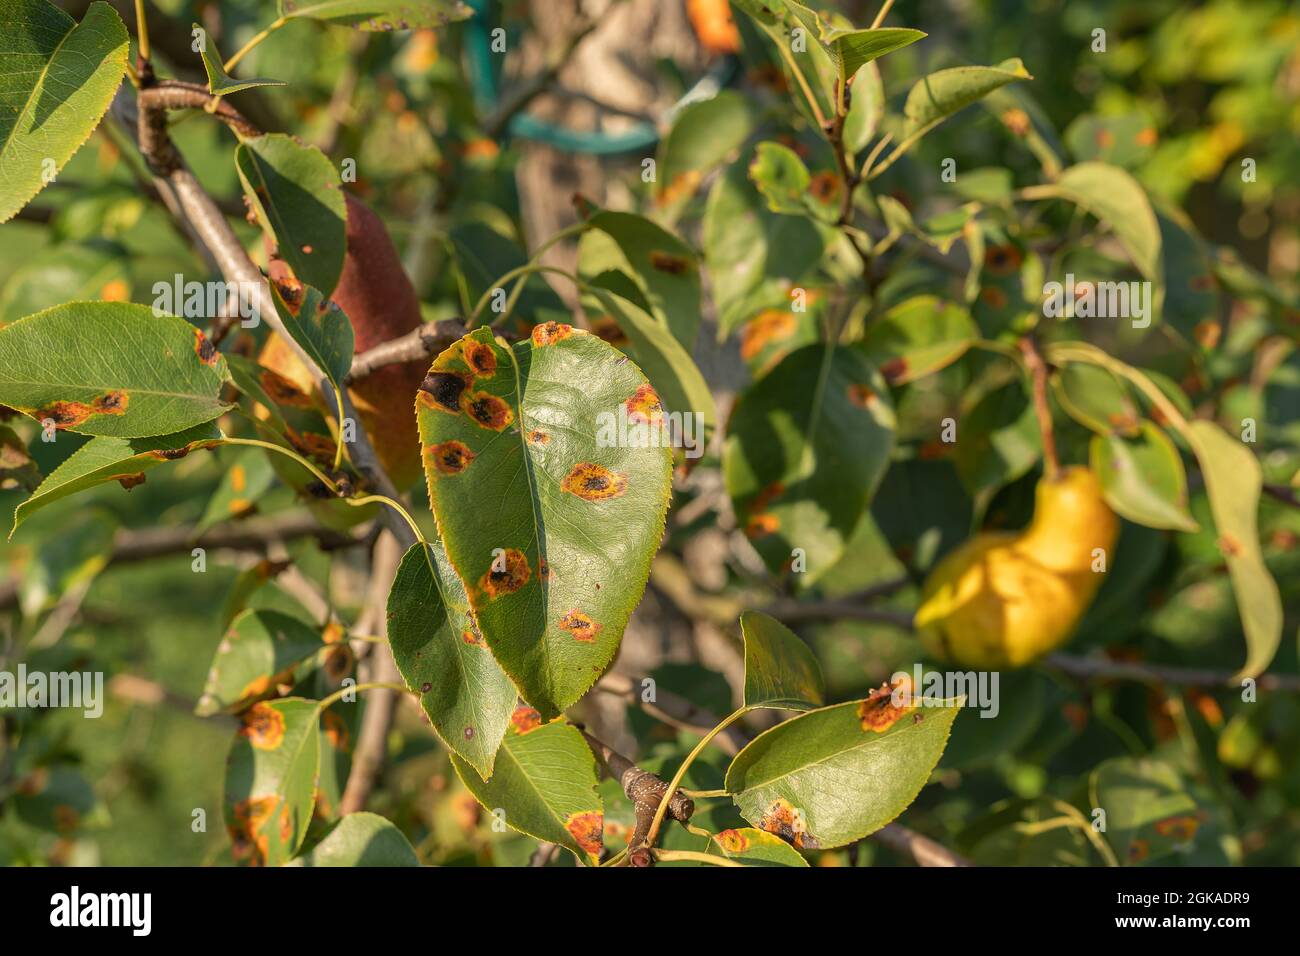 Disease fungal spores of rust on pear plant. Autumn spraying with fungicides against fungal diseases of trees in garden Stock Photo